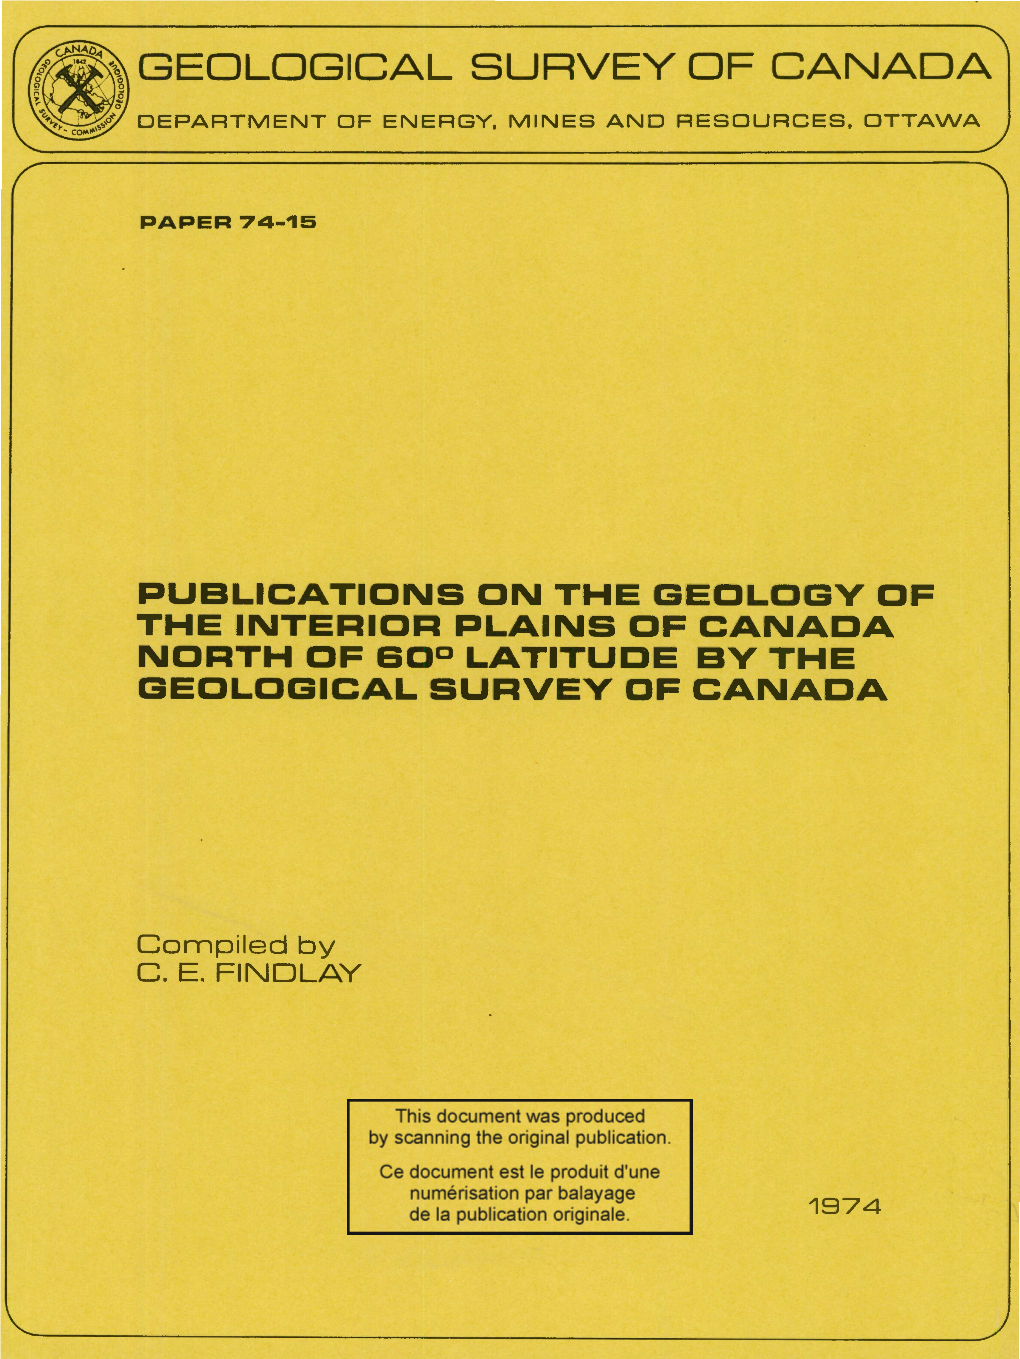 Publications on the Geology of the Interior Plains of Canada North of 60° Latitude by the Geological Survey of Canada